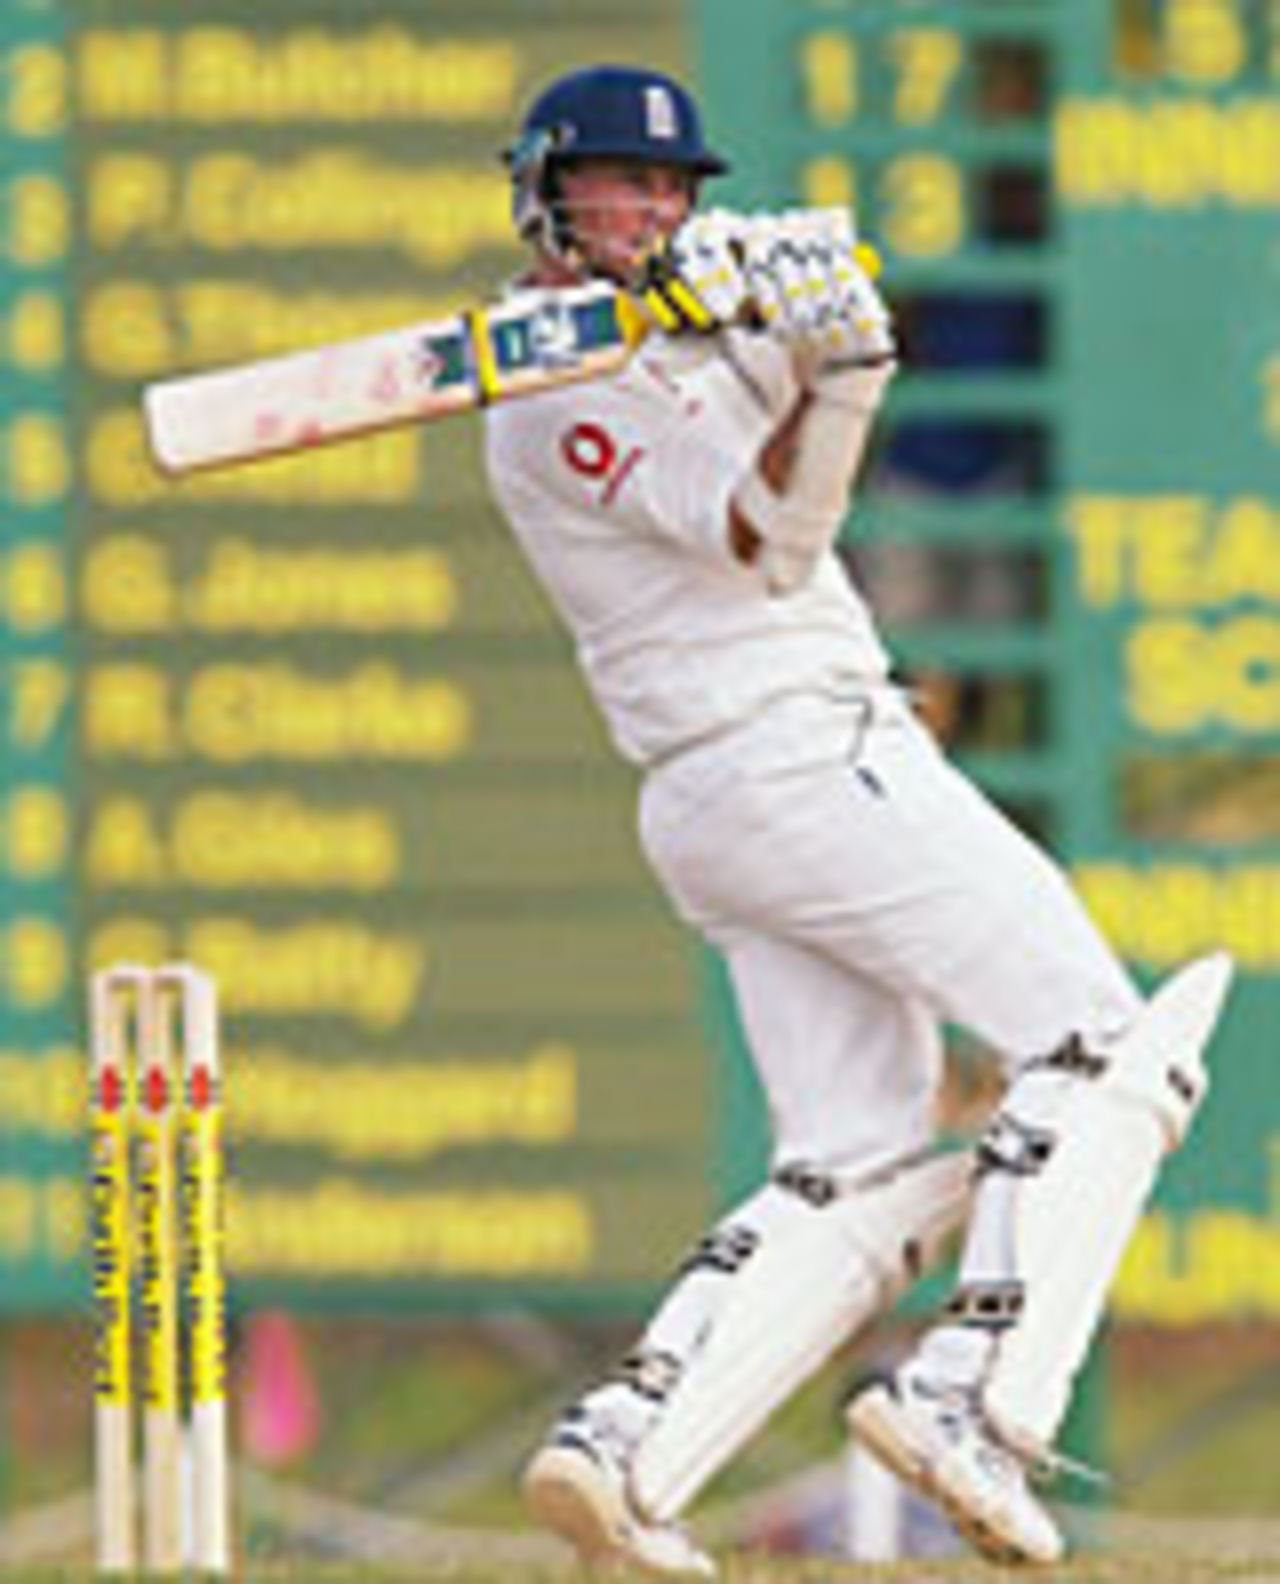 Marcus Trescothick on his way to 50, England v Carib Beer XI, Barbados, March 26, 2004